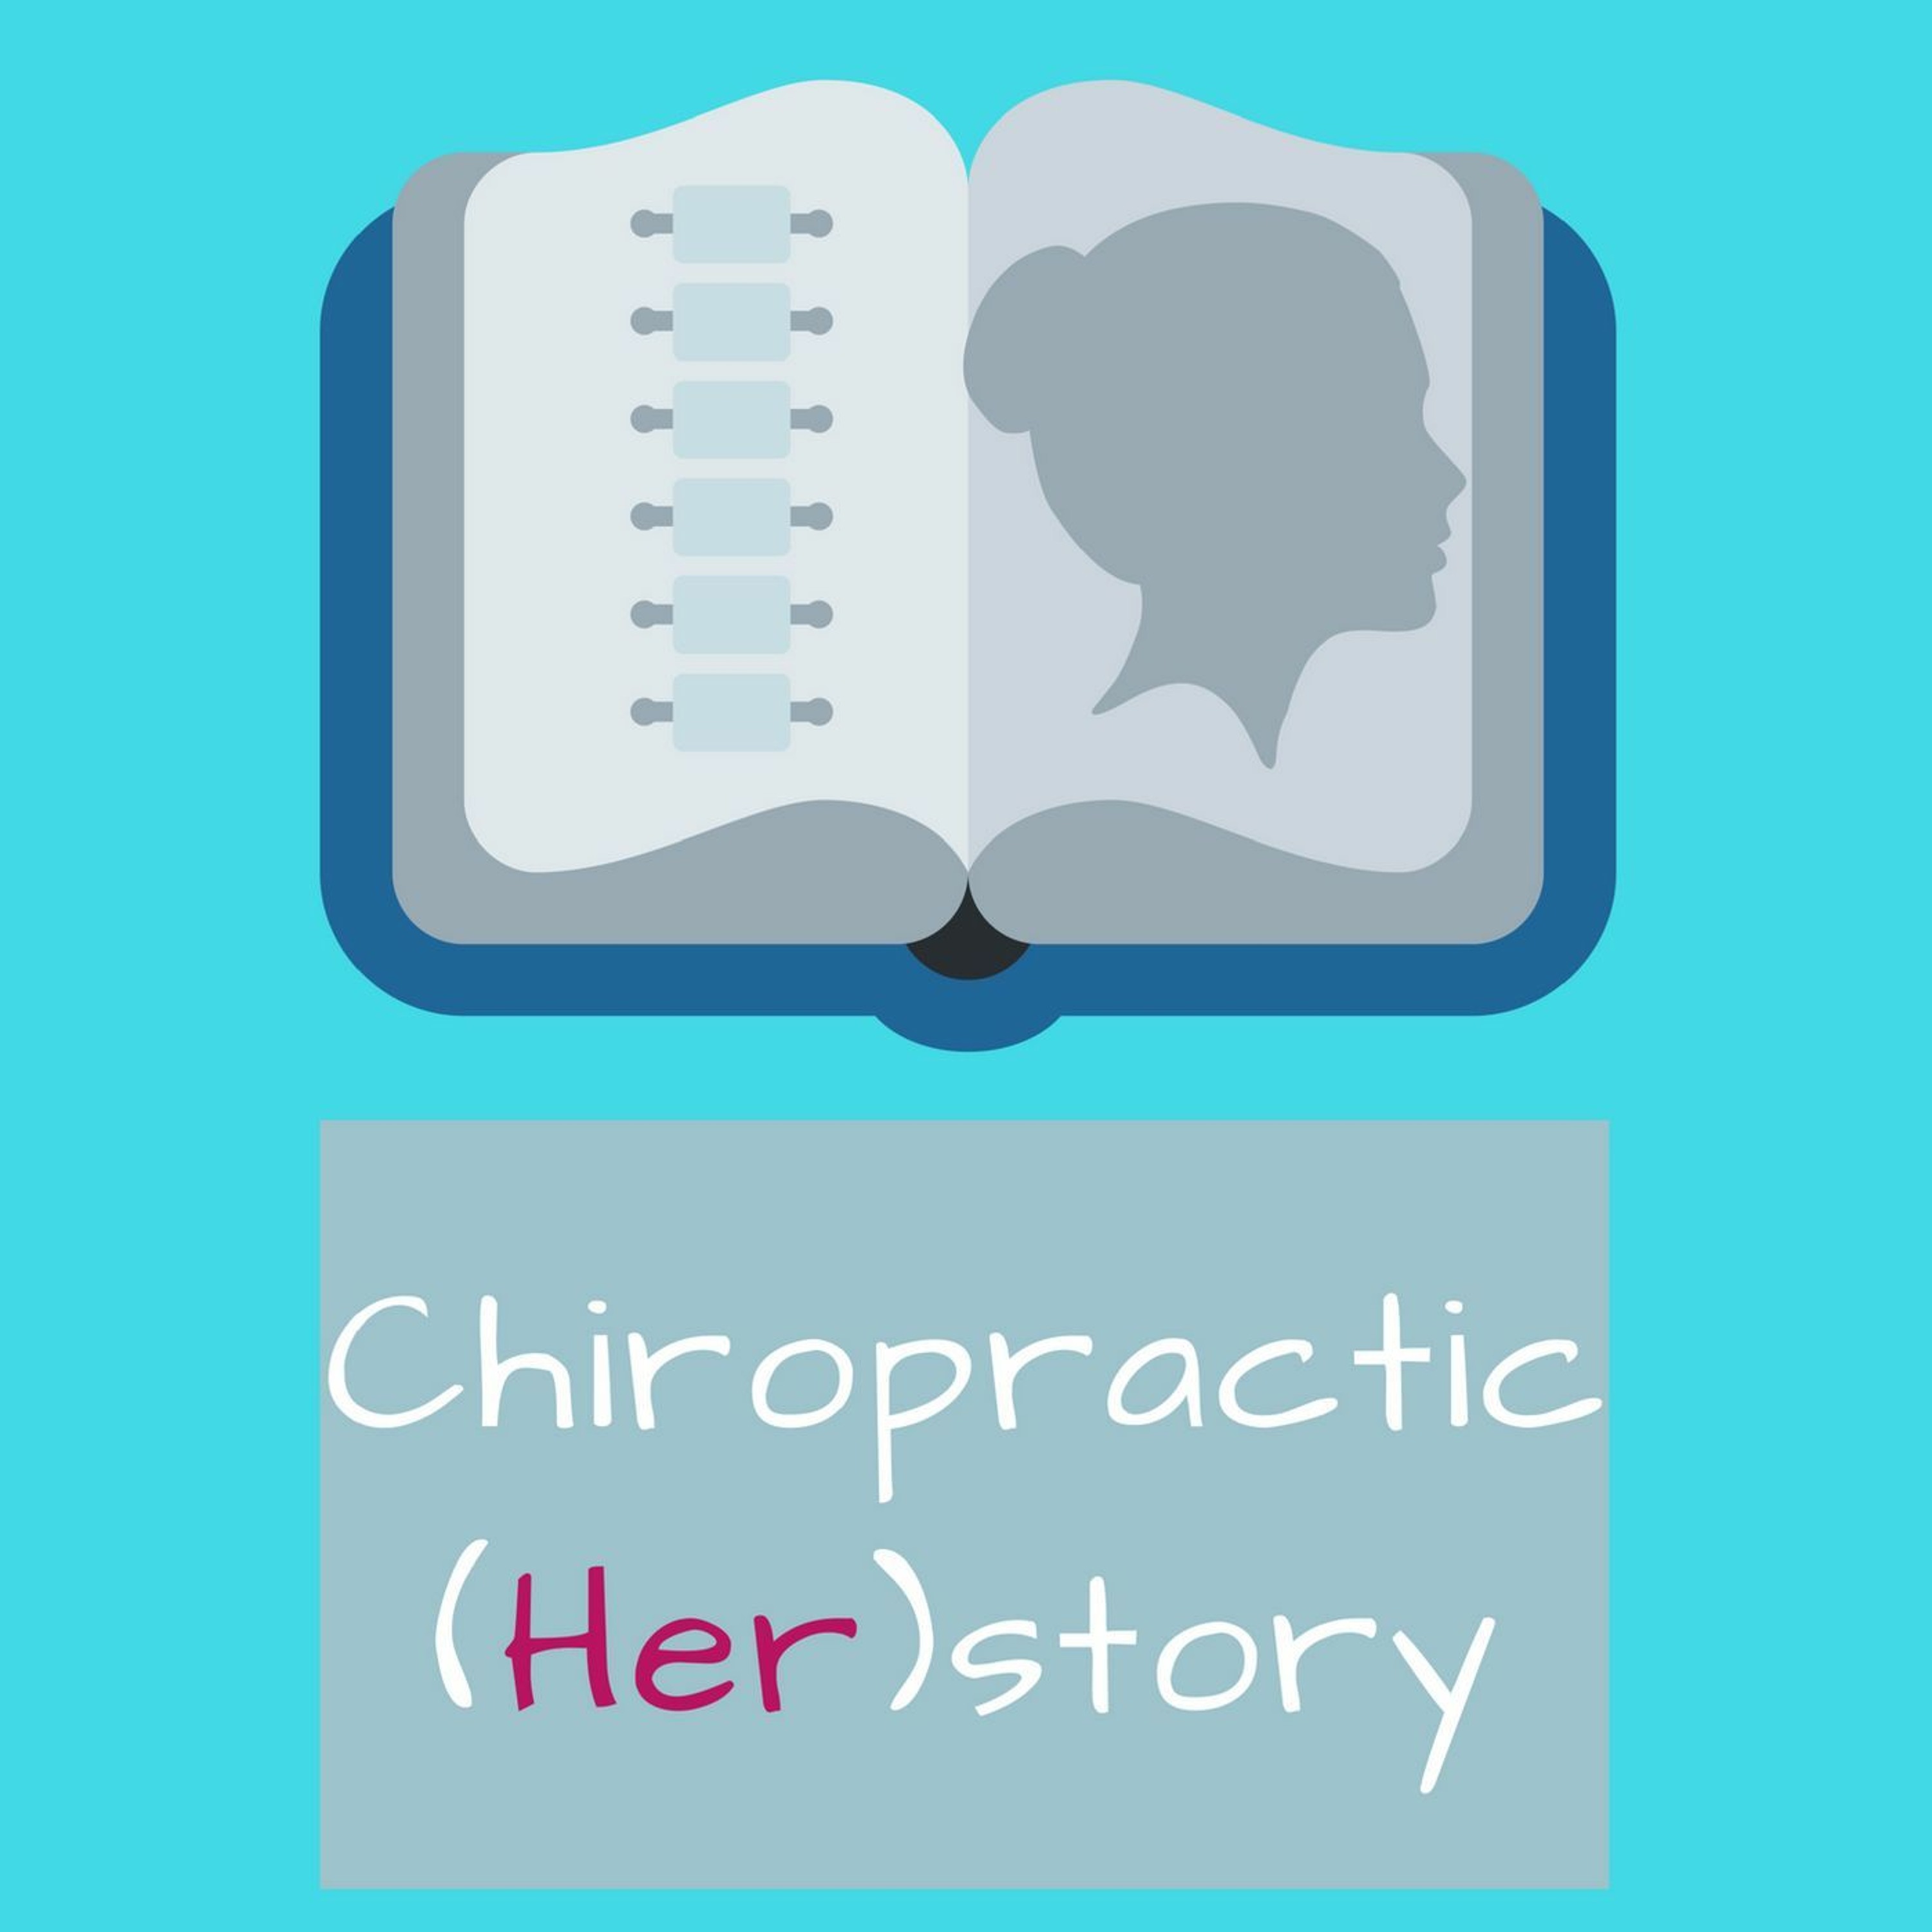 Dr. Lavonne Pineda- Chiropractic (Her)story Episode 59